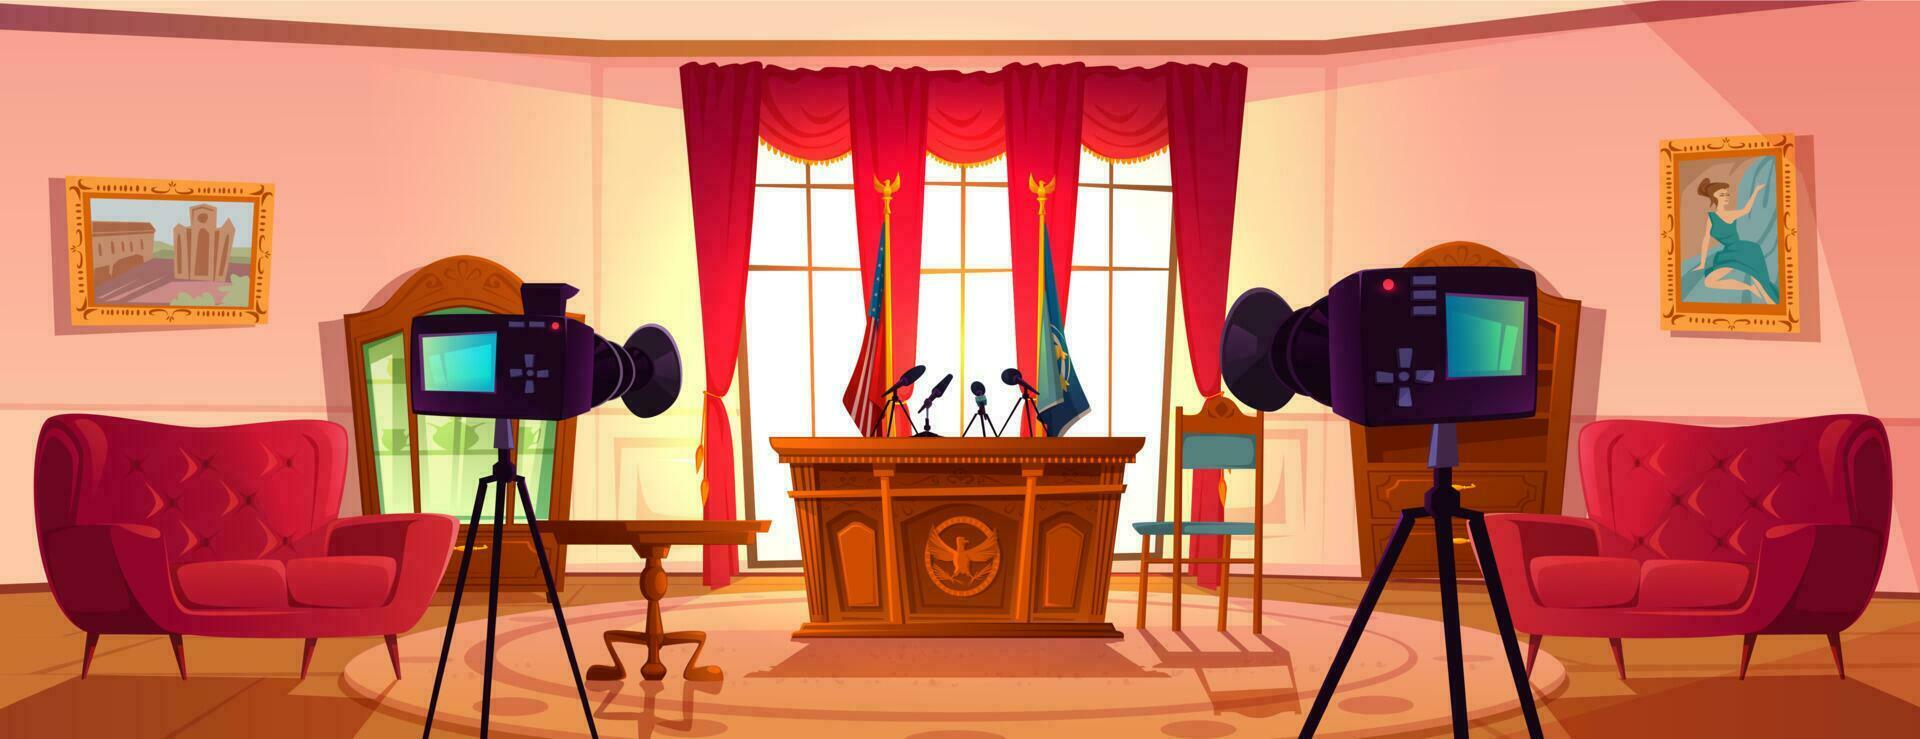 Empty conference room for president negotiations vector